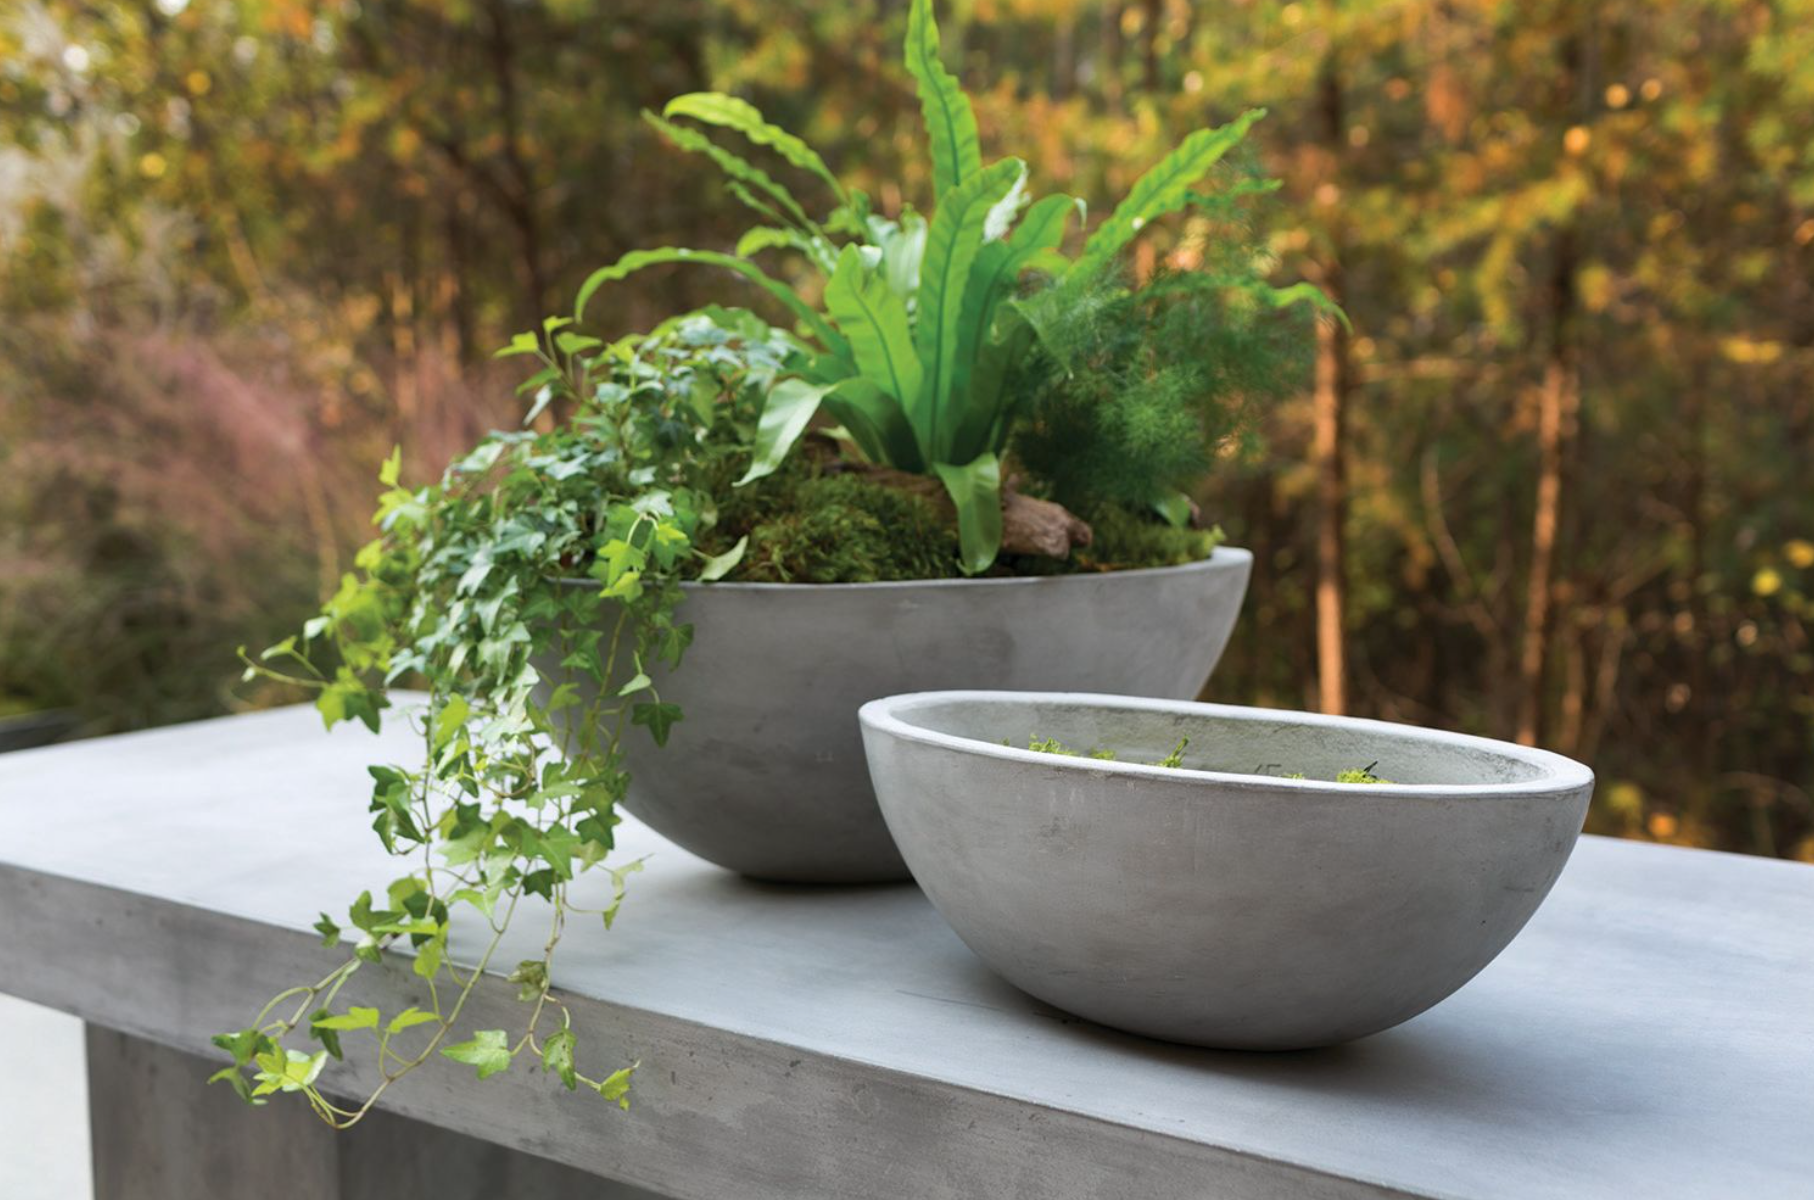 Set Sail with Style: Newport Boat Planter